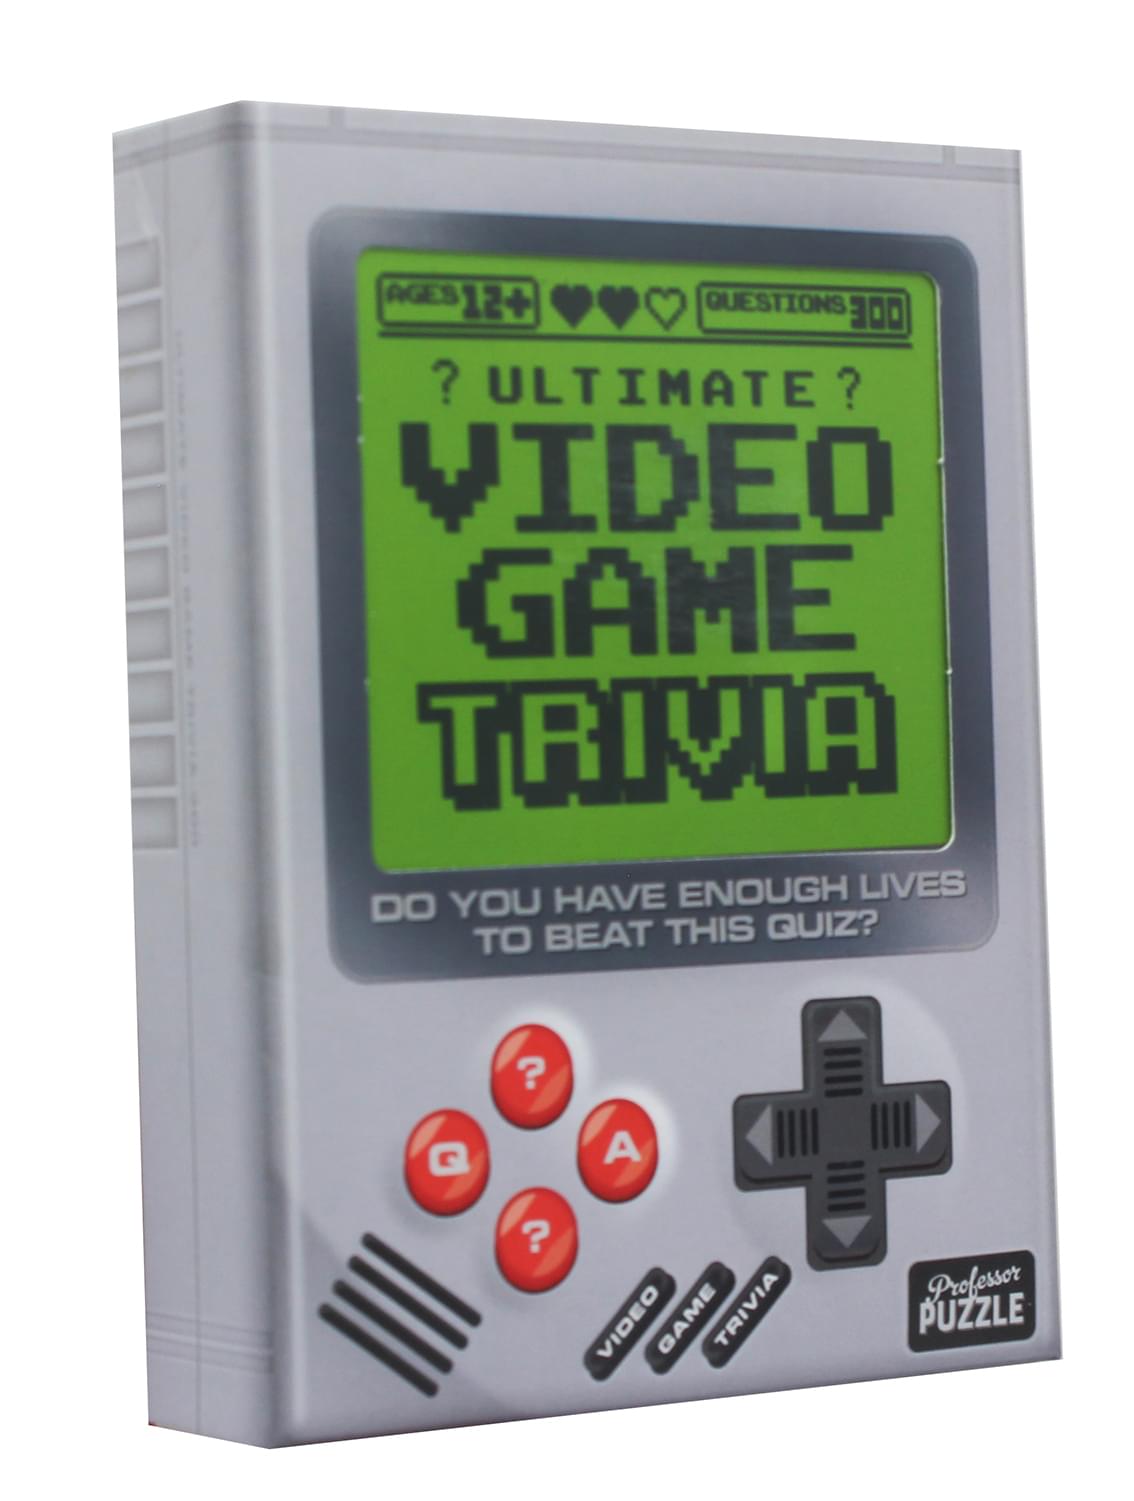 Ultimate Video Game Trivia Card Game | 300 Questions